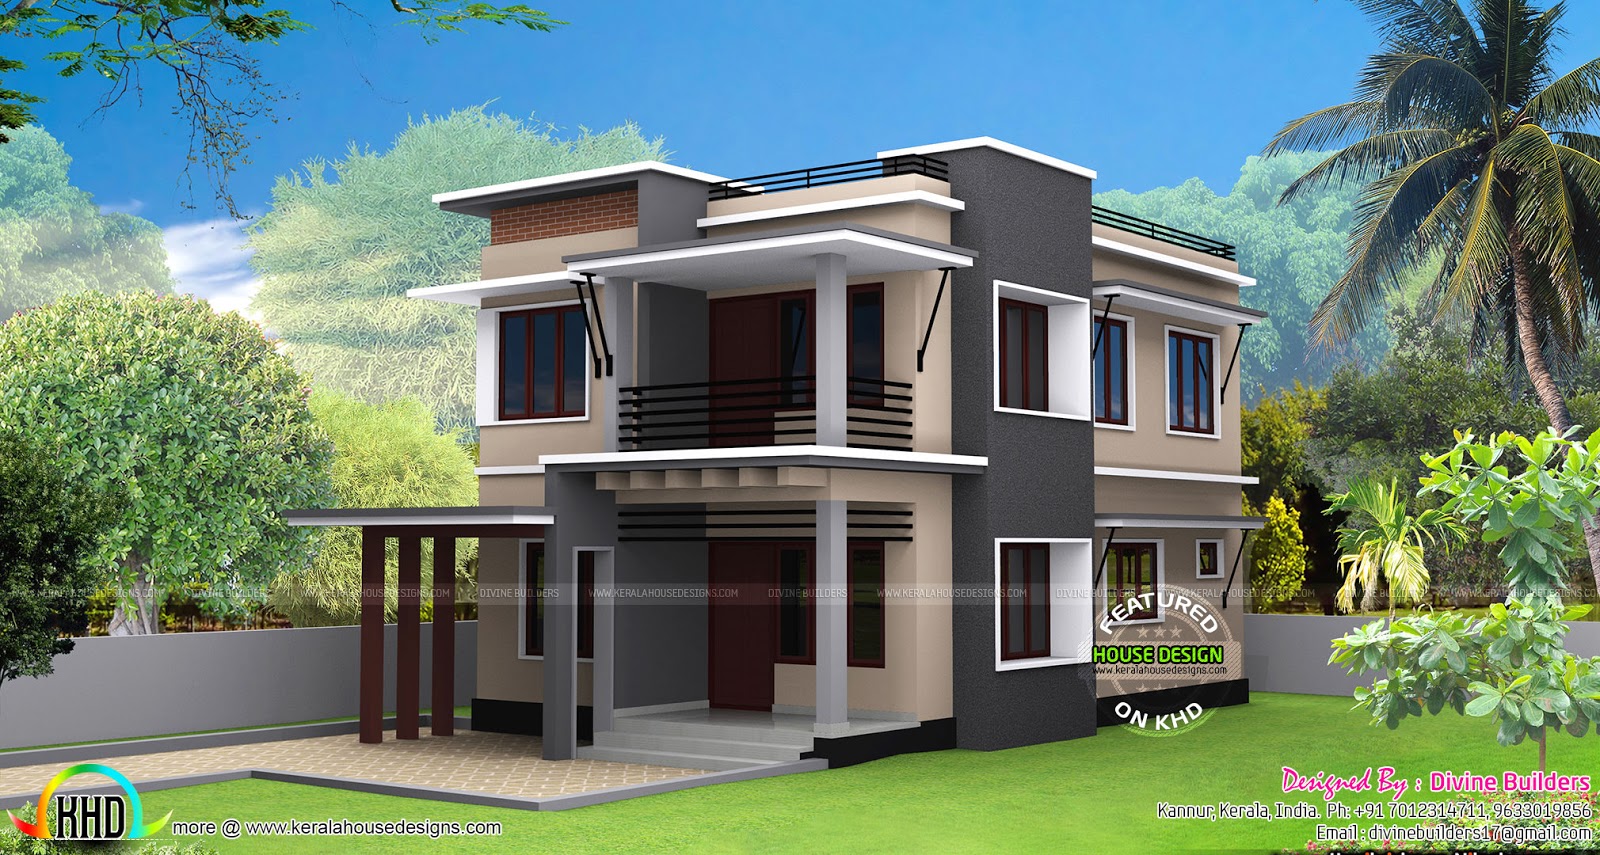 30 Lakhs  Rupees cost estimated modern house  Home  Design  